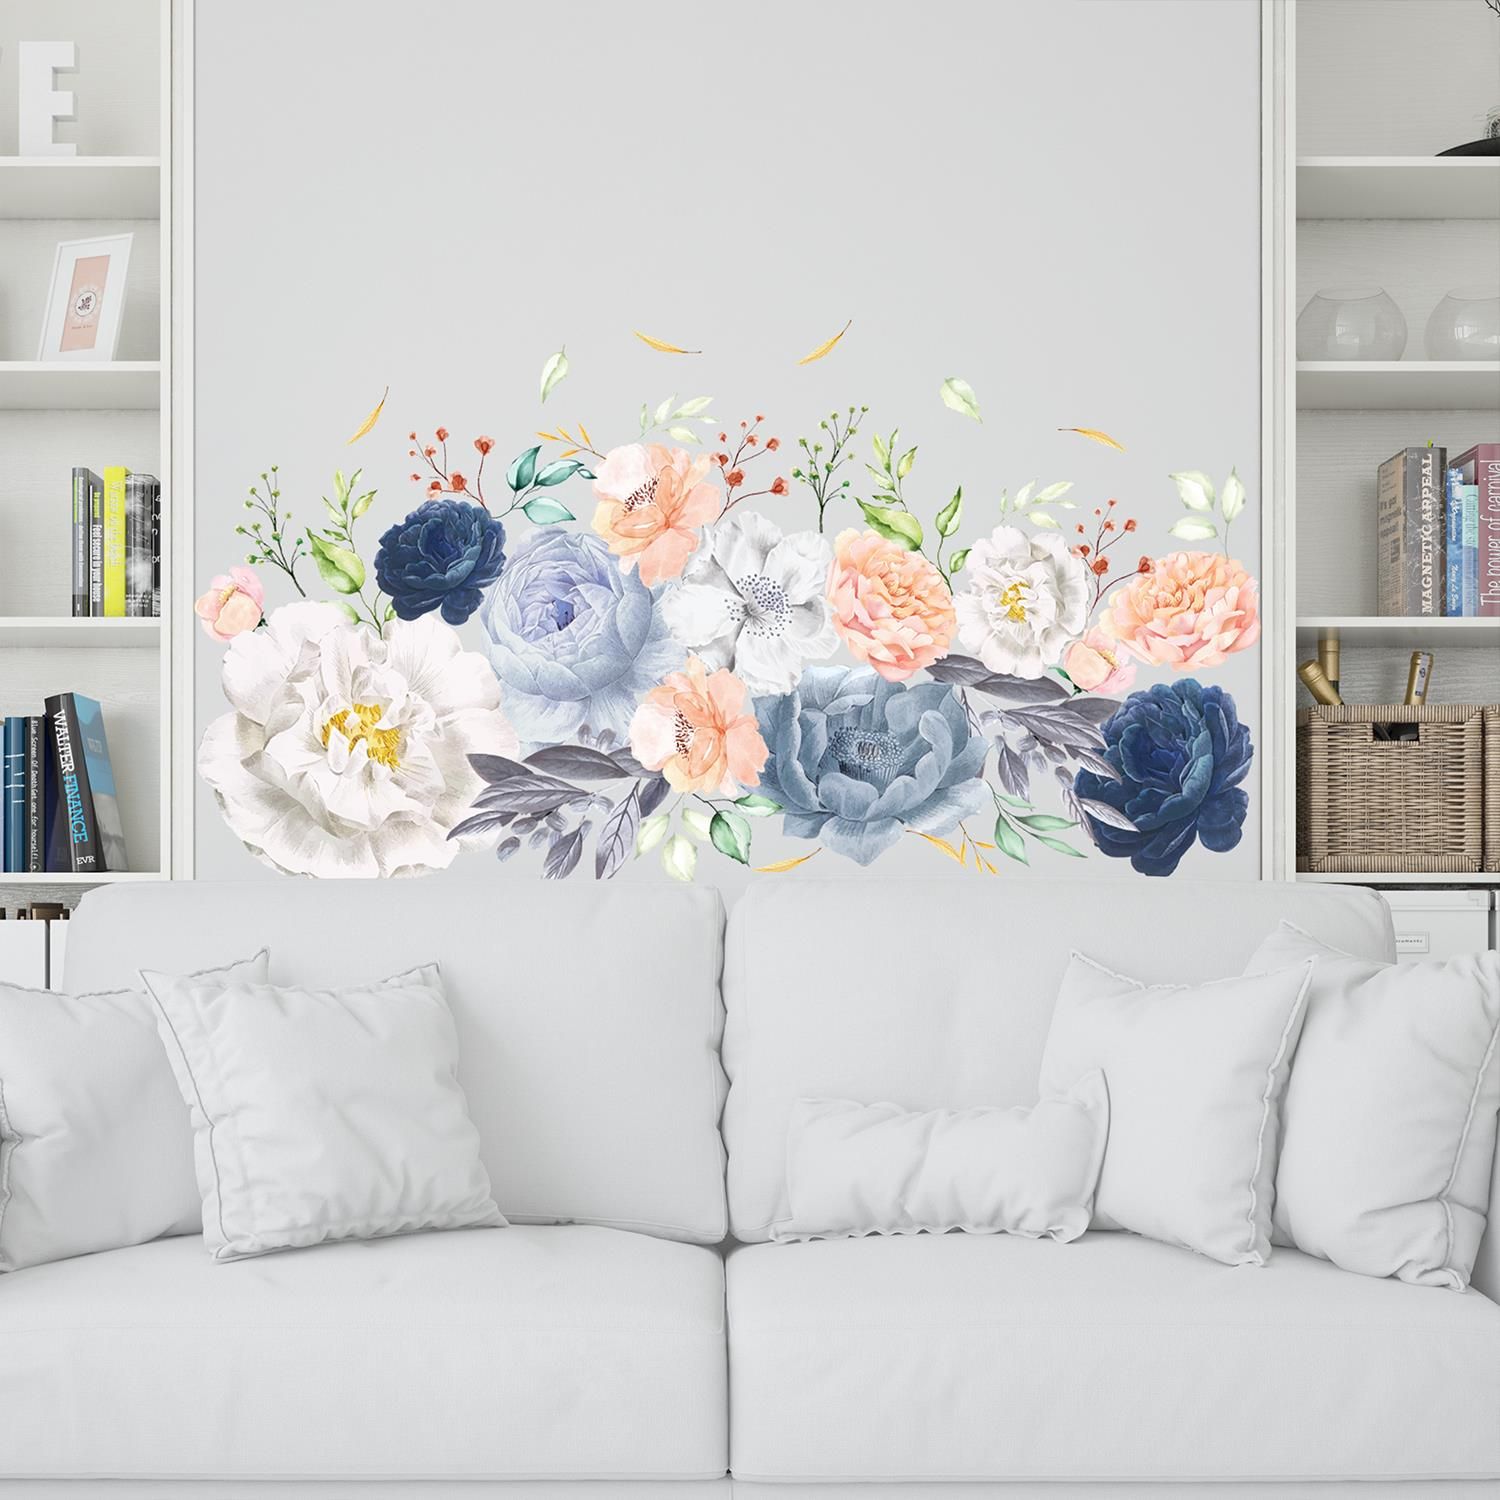 - Transform your rooms with our watercolour floral wall mural stickers set!To apply, just peel and stick onto any clean, flat surfaces like wall, furniture or as window screen, and you are good to go! 
- Easy to install and to remove without leaving a trace. Can be easily trimmed / cut to fit. 
- Application Notes: Please only attach to the painted surface at least three weeks after painting and clean the surface prior to application. 
- Stickers applied on laminated or wallpapered surfaces cannot be removed. DO NOT APPLY in places with direct contact to fire! 
- Please note: Your monitor color may vary from the actual product. Package Contains: 6 sheets of 60 x 90 cm with 49 pieces of stickers. Finishing size: 232 x 121 cm or 91.3 x 47.6 inches.